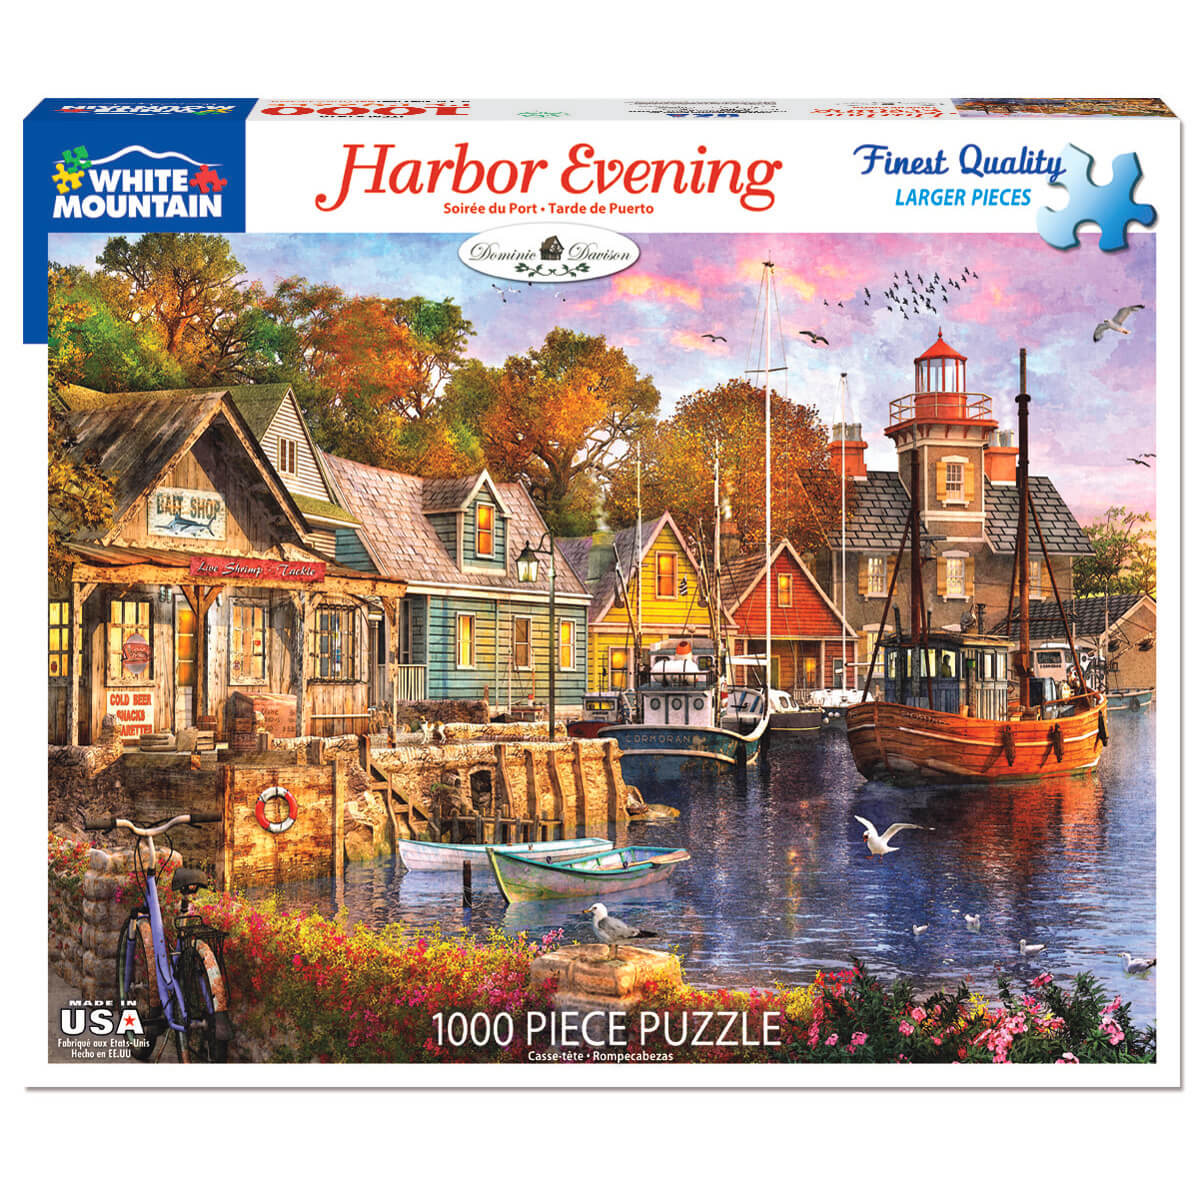 White Mountain Puzzles Harbor Evening 1000 Piece Jigsaw Puzzle